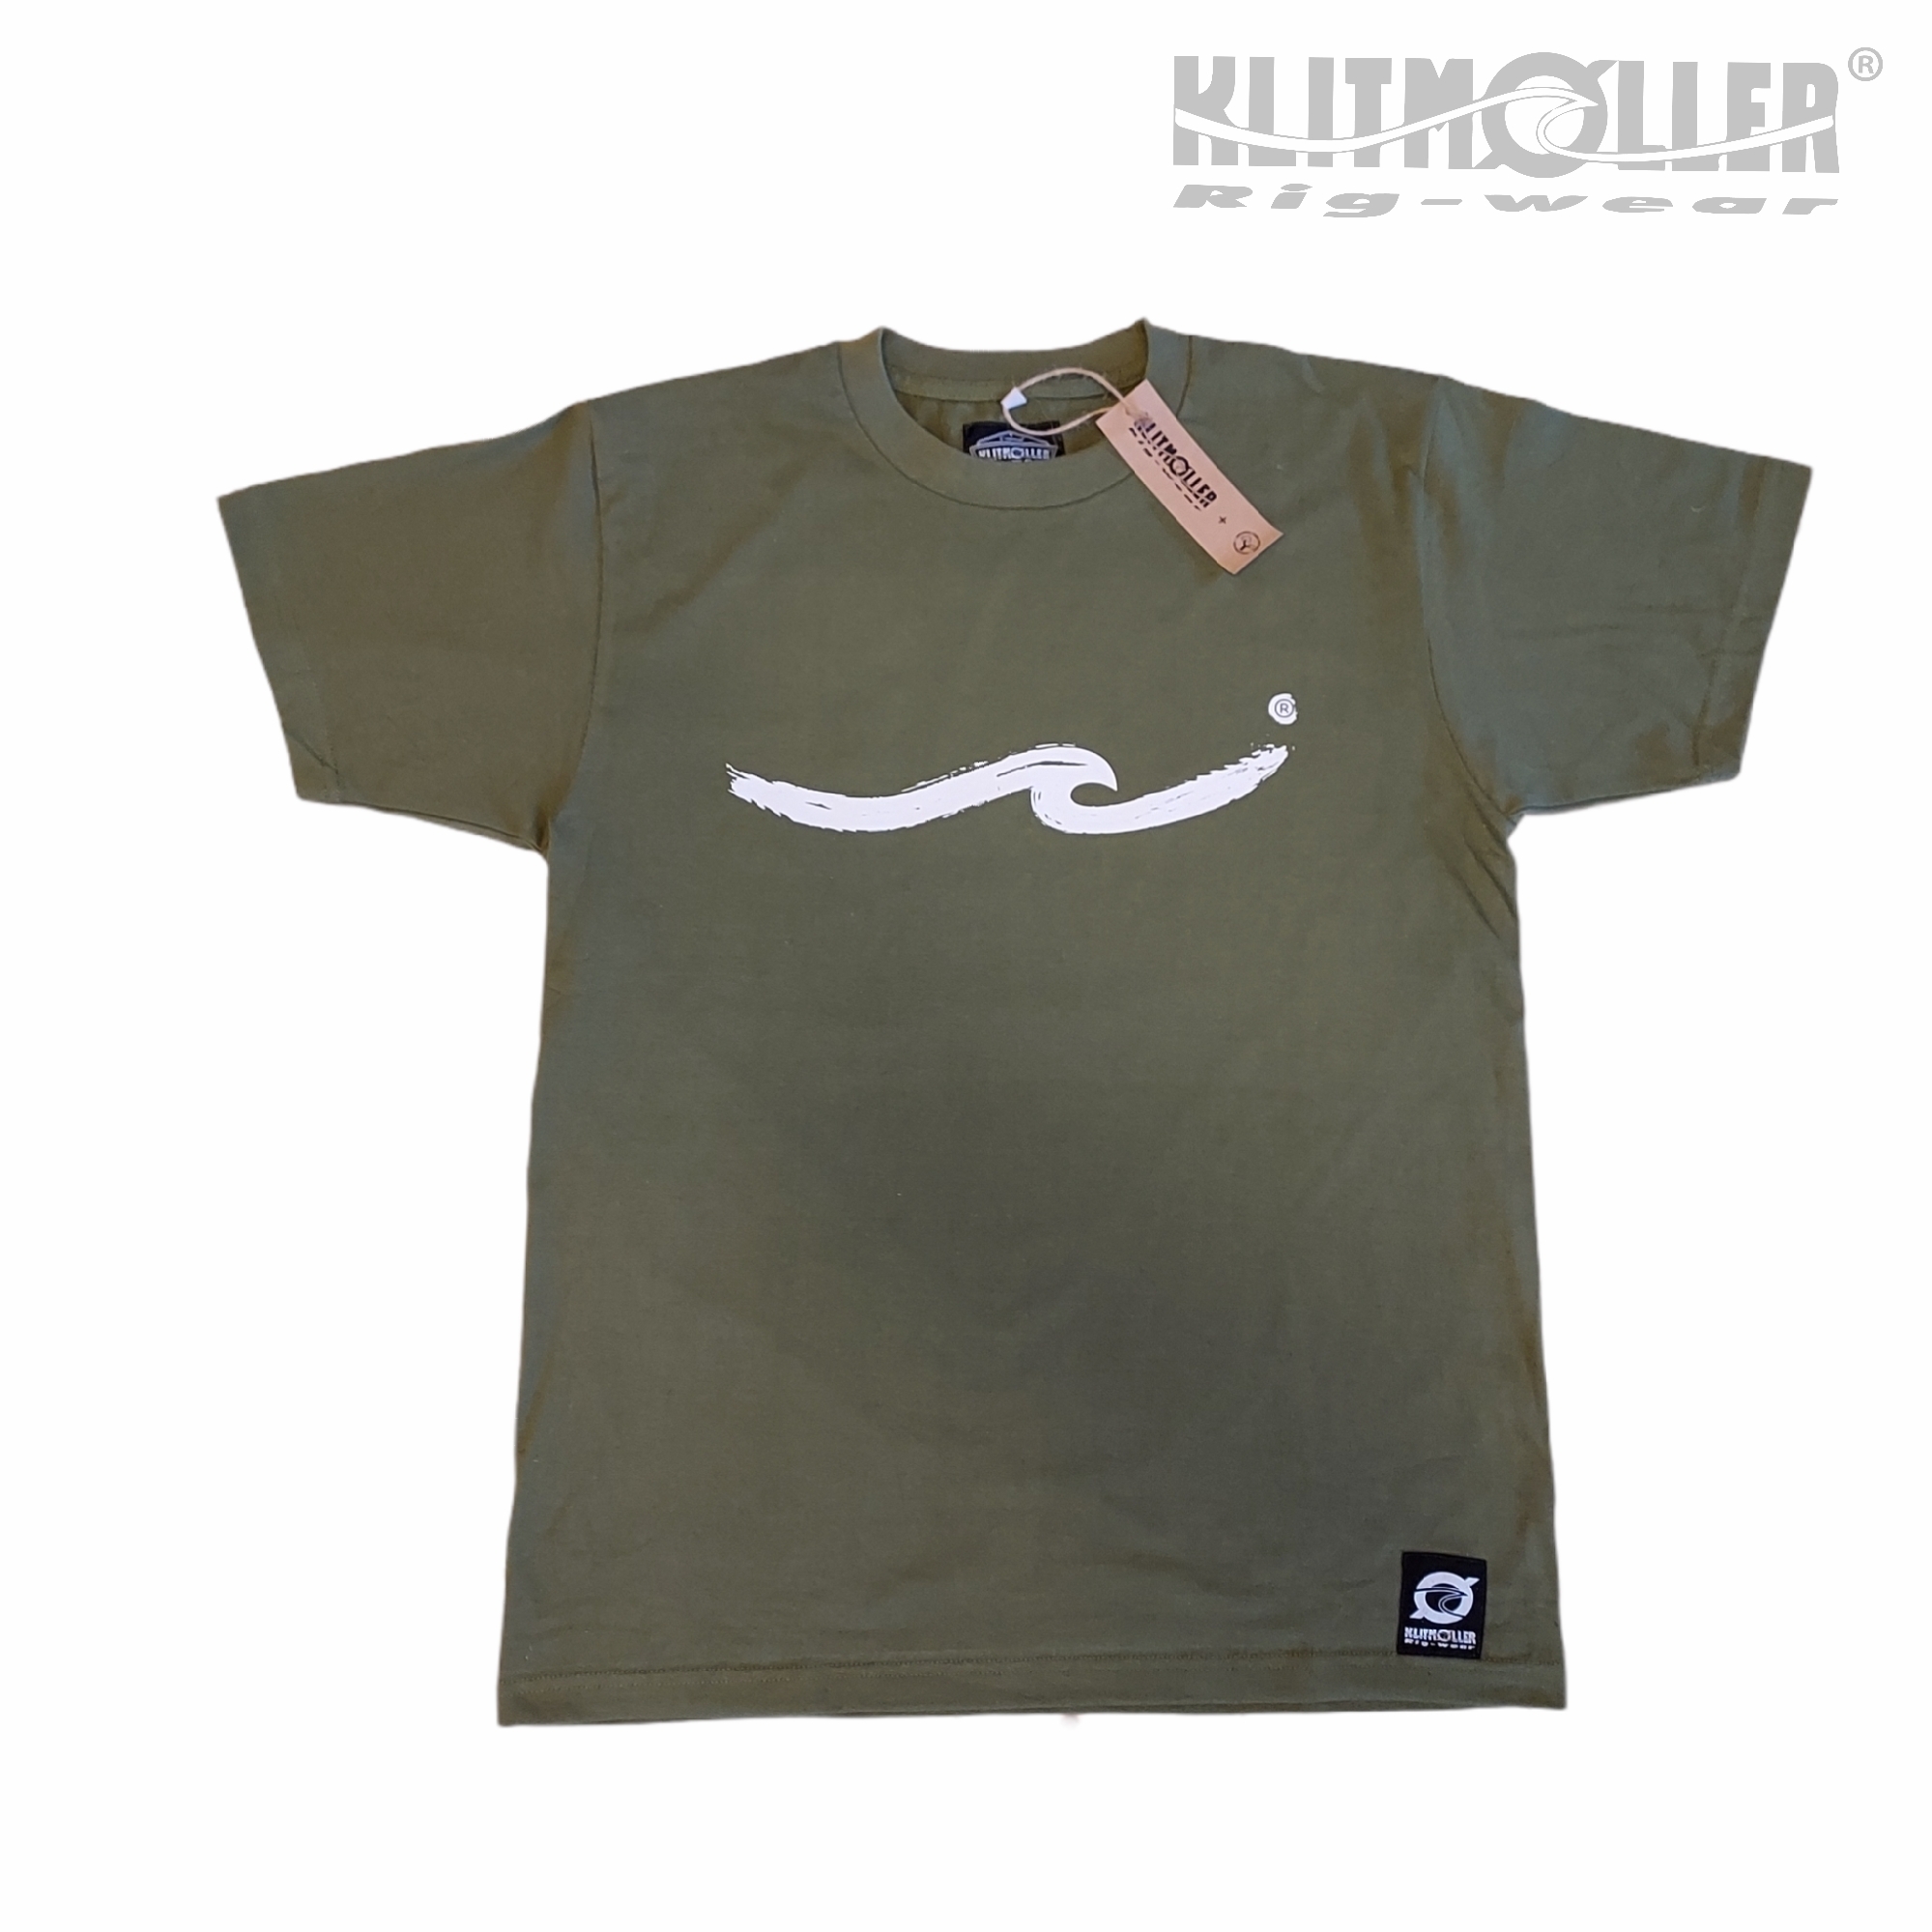 T-shirt Brushed Wave faded olive green